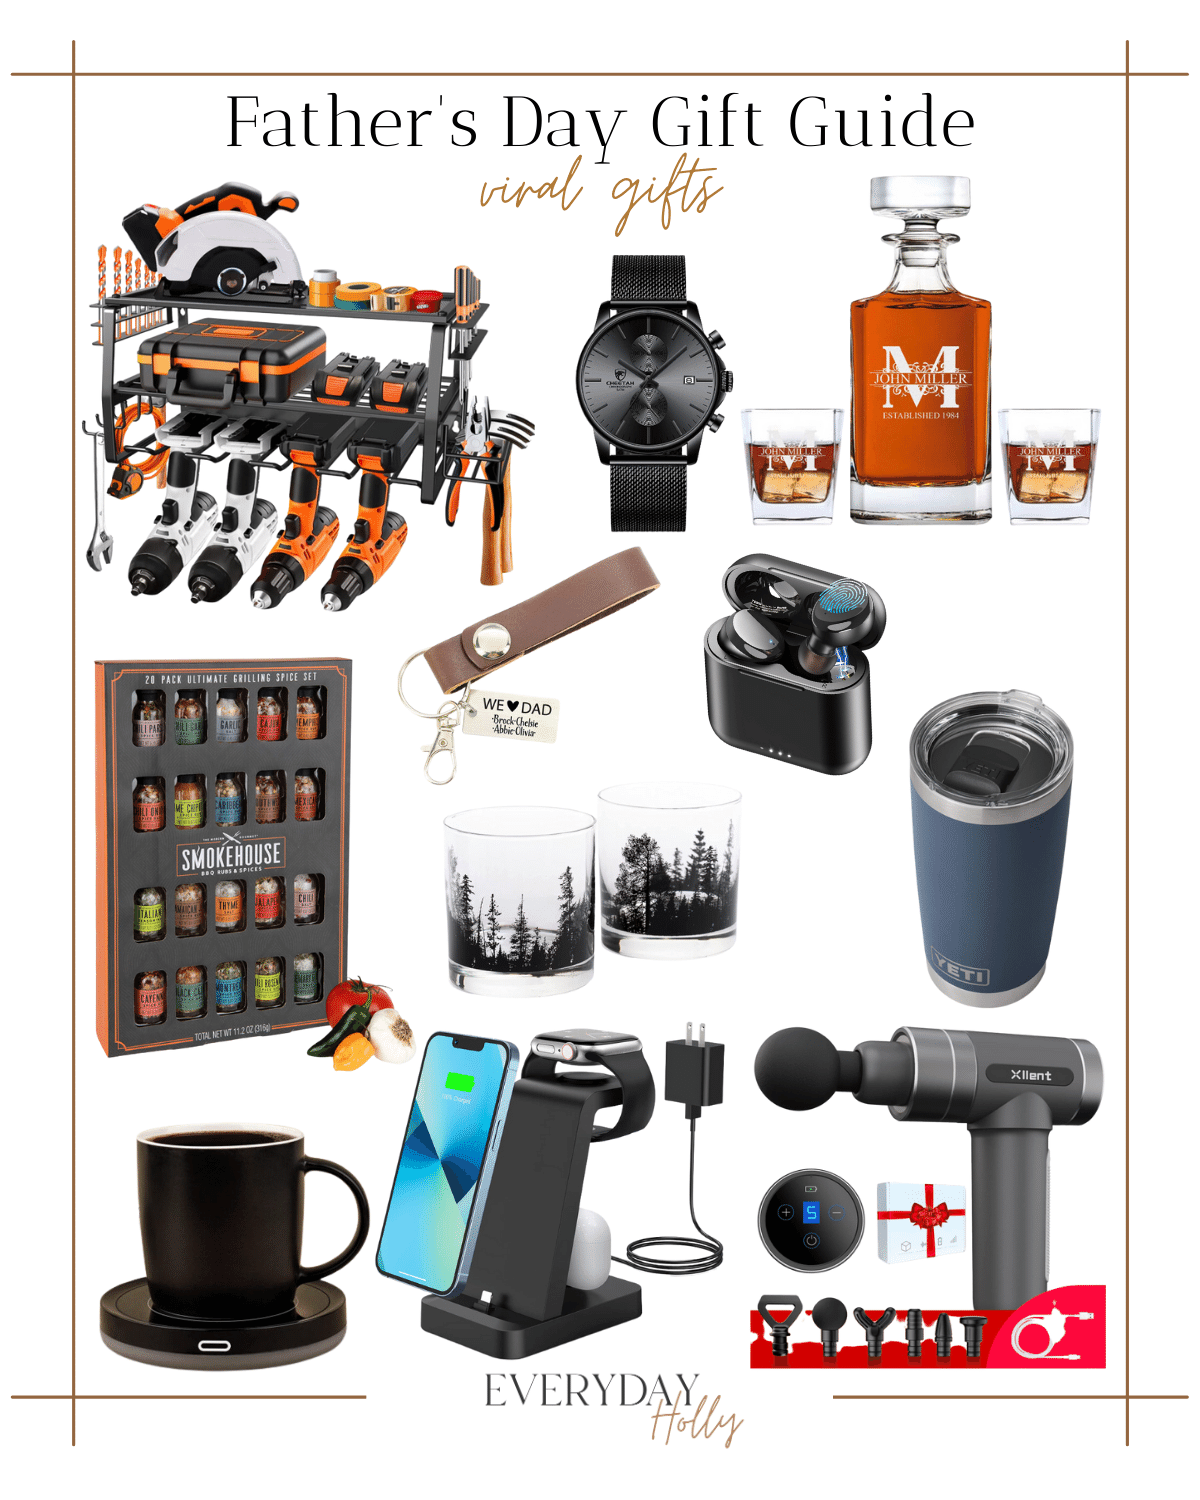 Tool Organizer, father's day gifts black watch, whiskey canister, keychain, spices rubs, earbuds, whiskey glasses, yeti tumbler, heated coffee warmer 